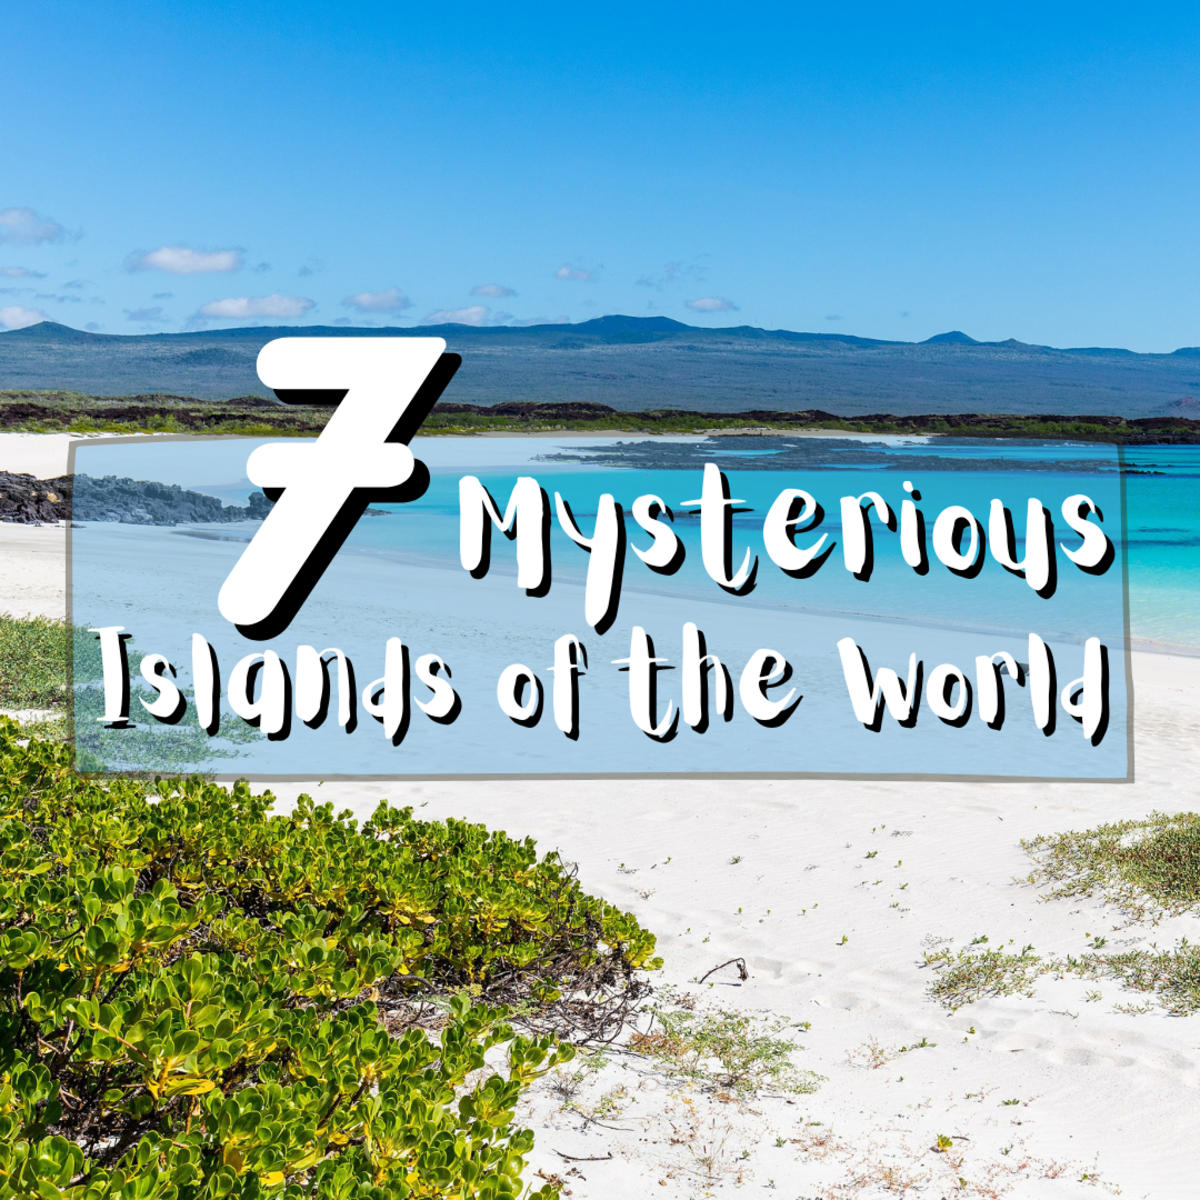 7 Mysterious Islands of the World